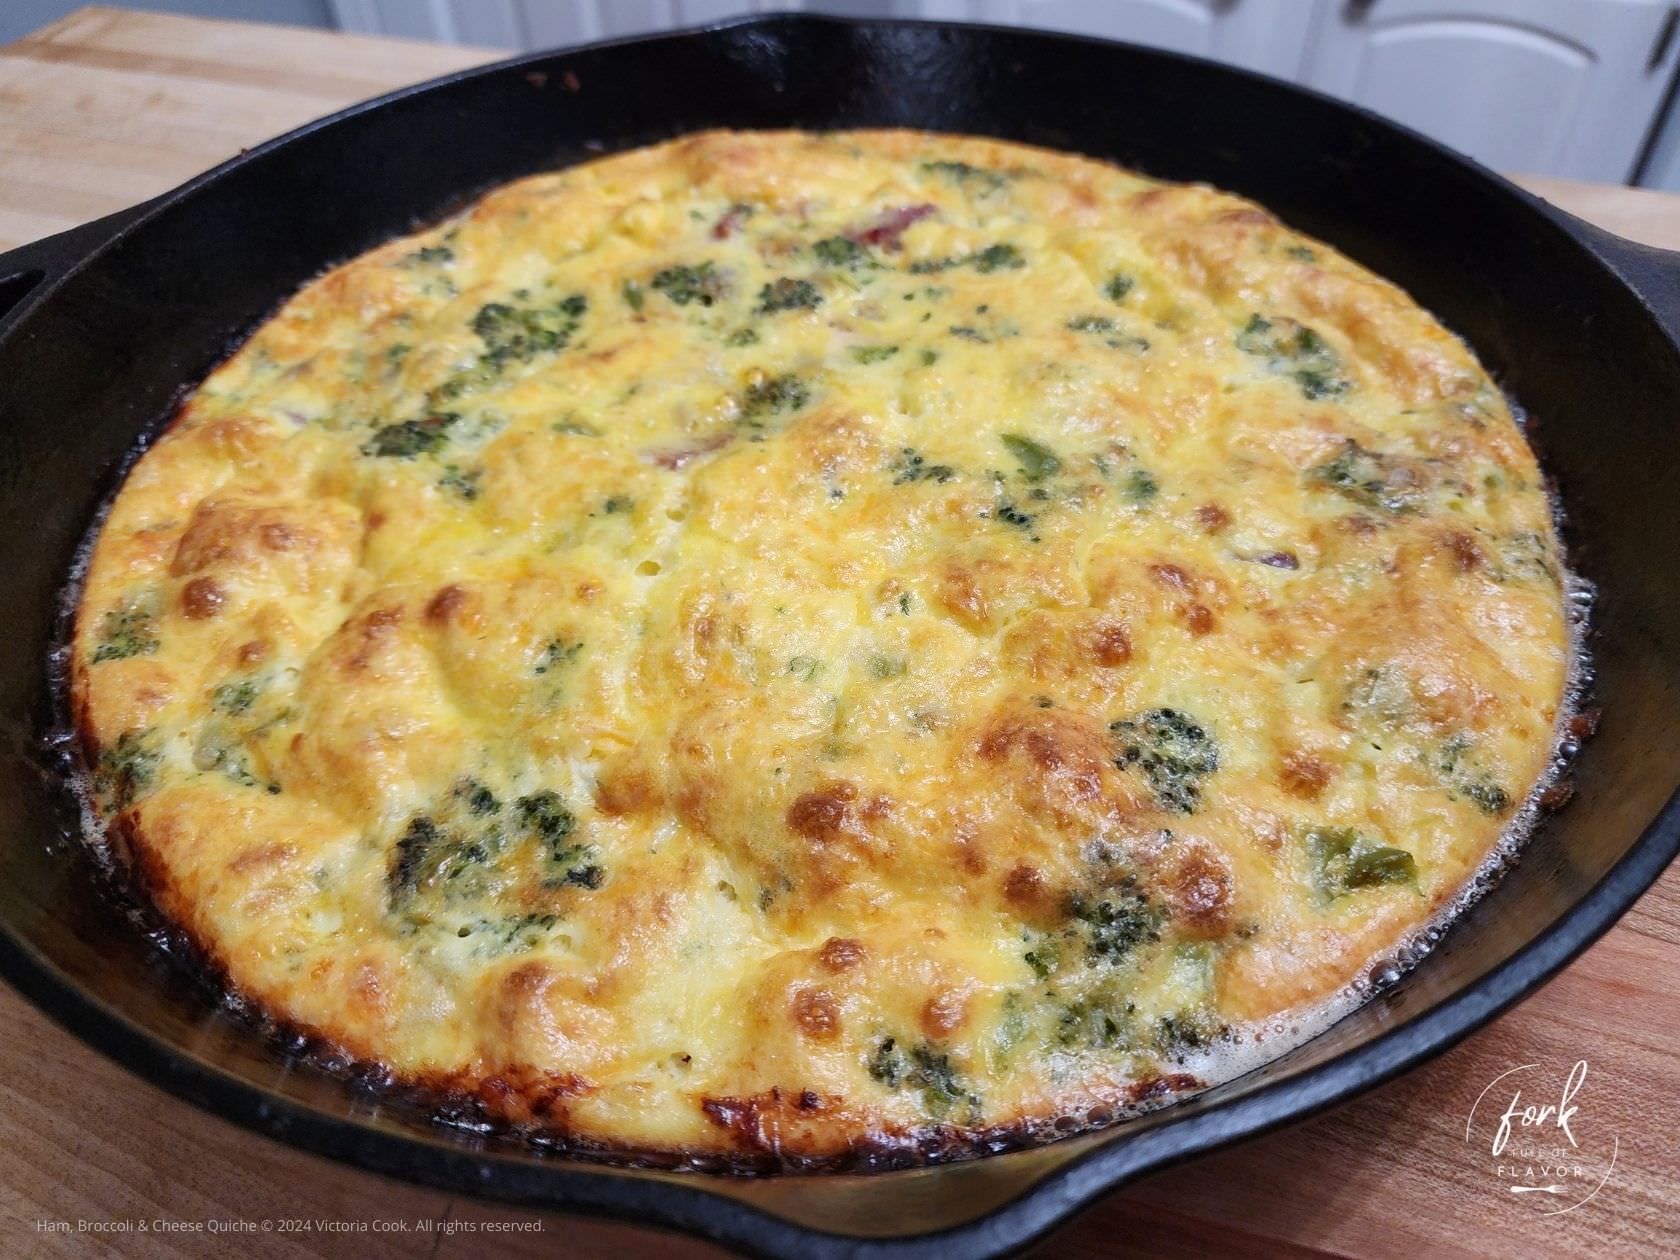 Broccoli, Ham and Cheese Quiche cooked in a cast iron pan